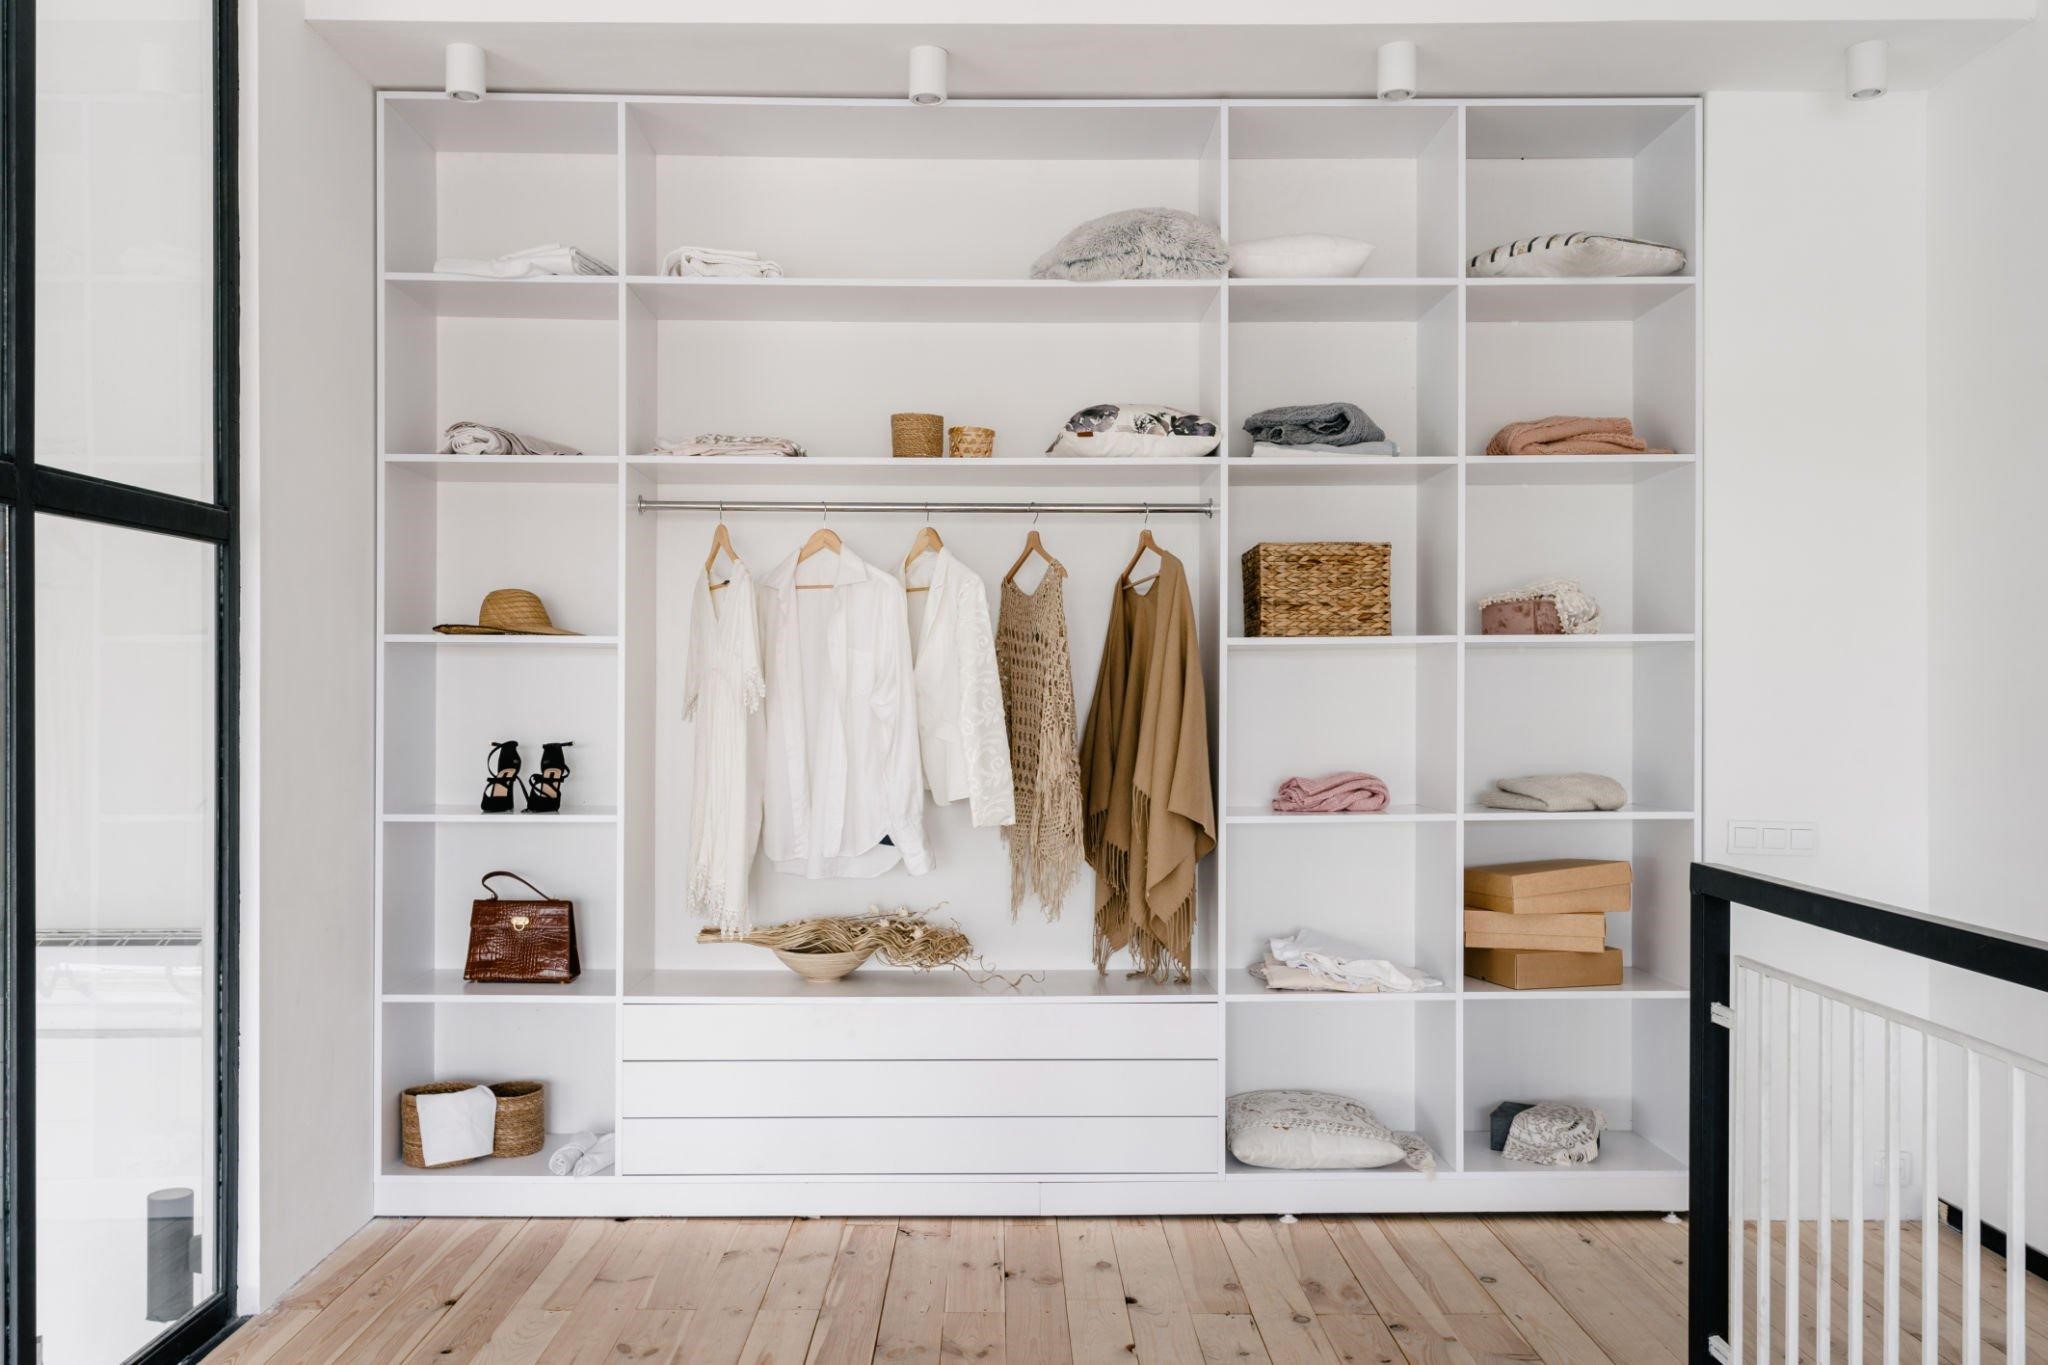 Benefits of choosing bespoke fitted wardrobes